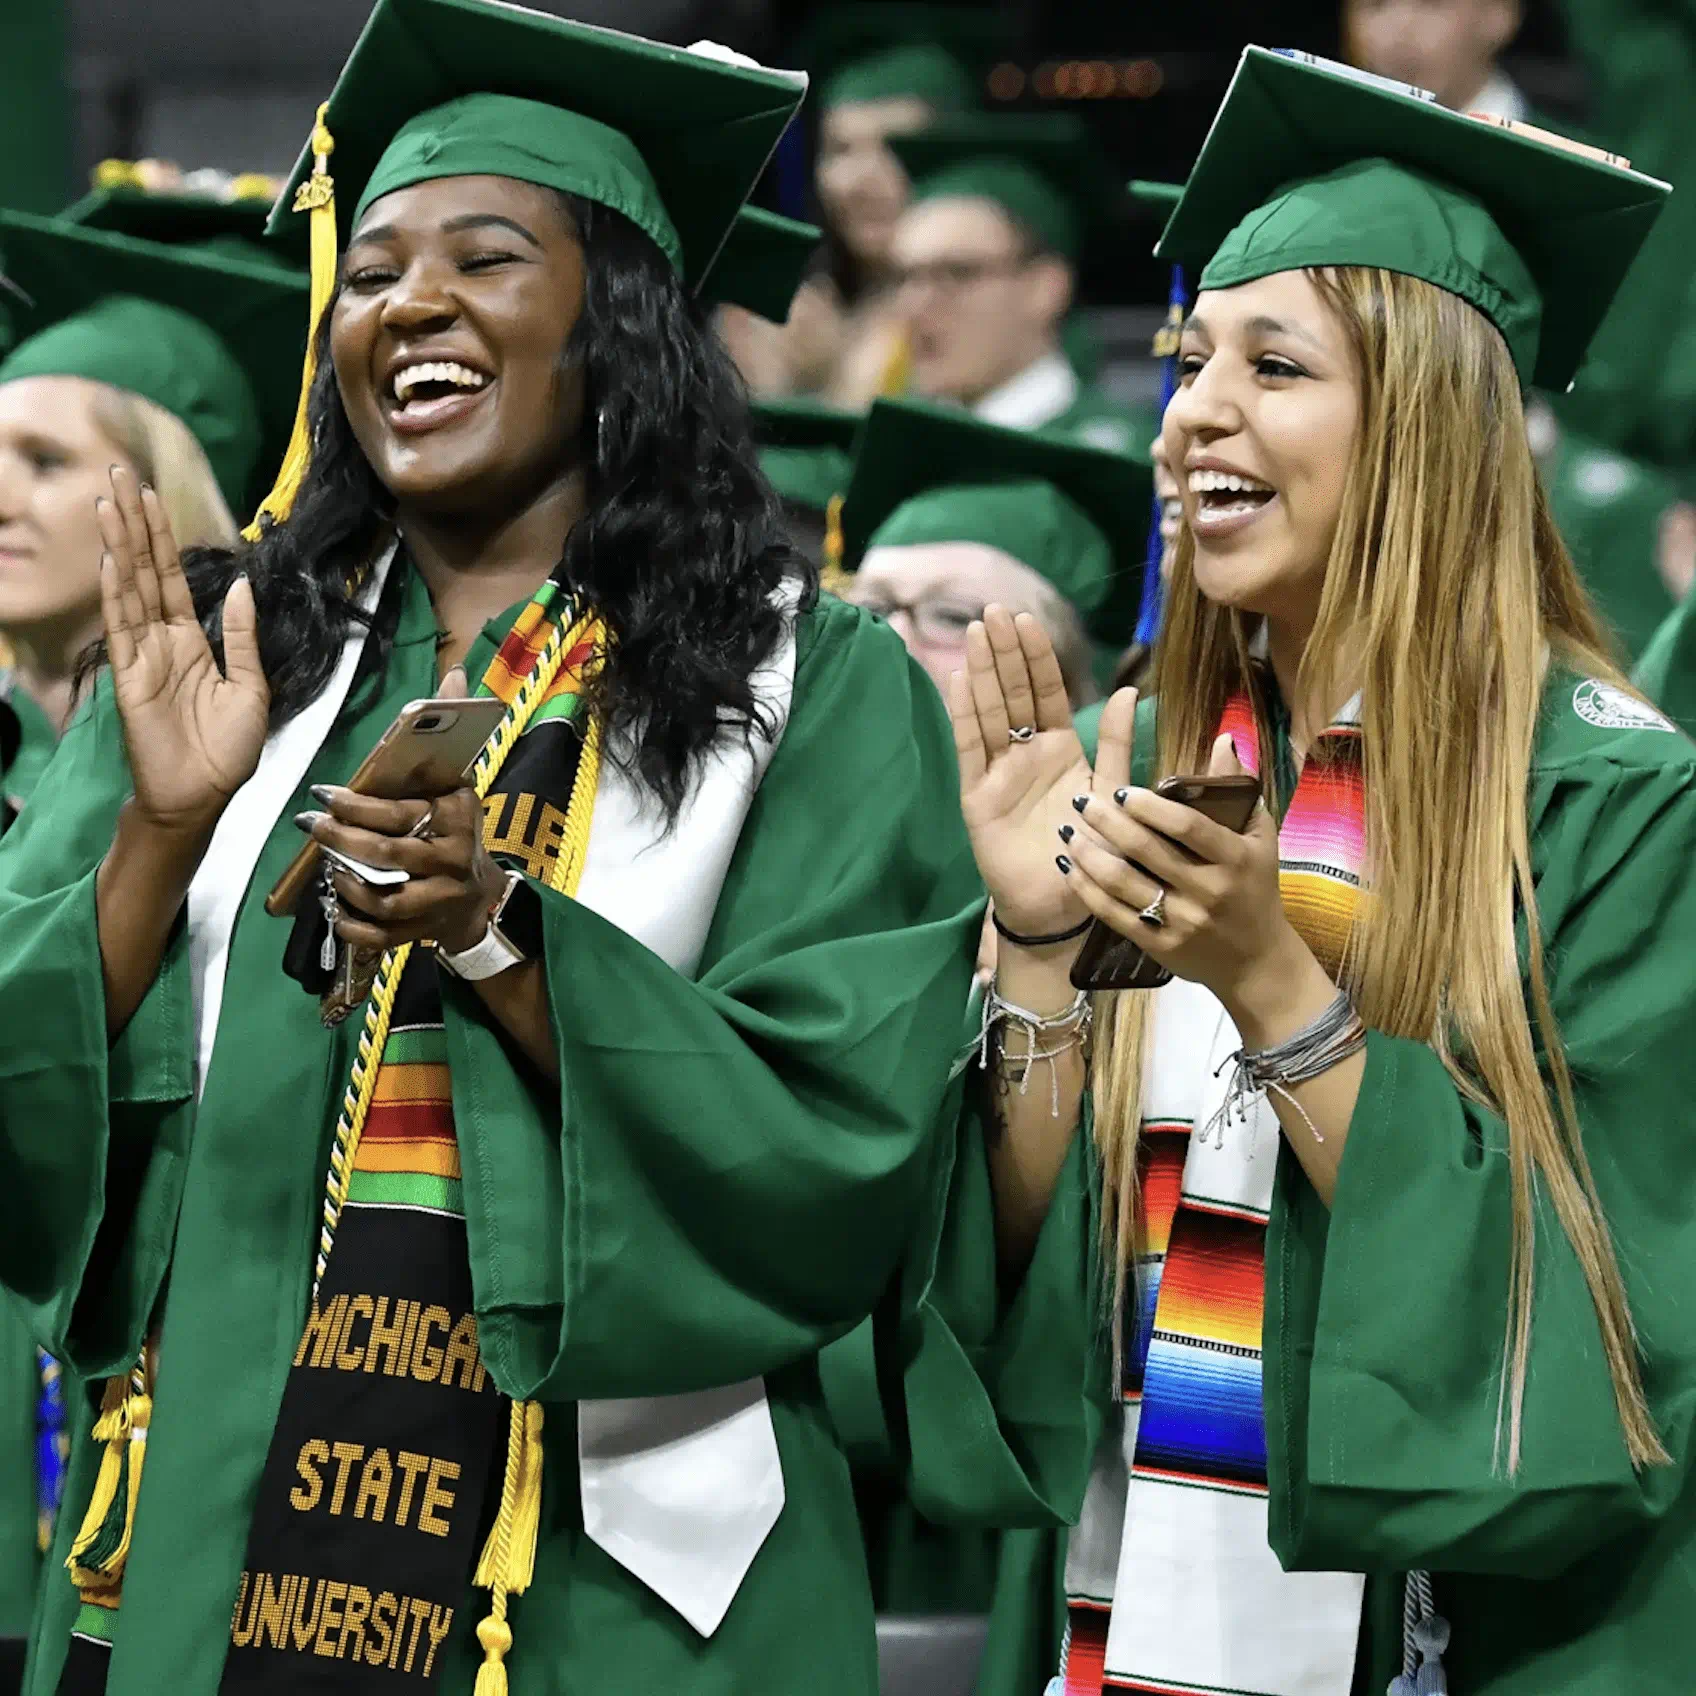 Graduates in green gowns and caps clapping